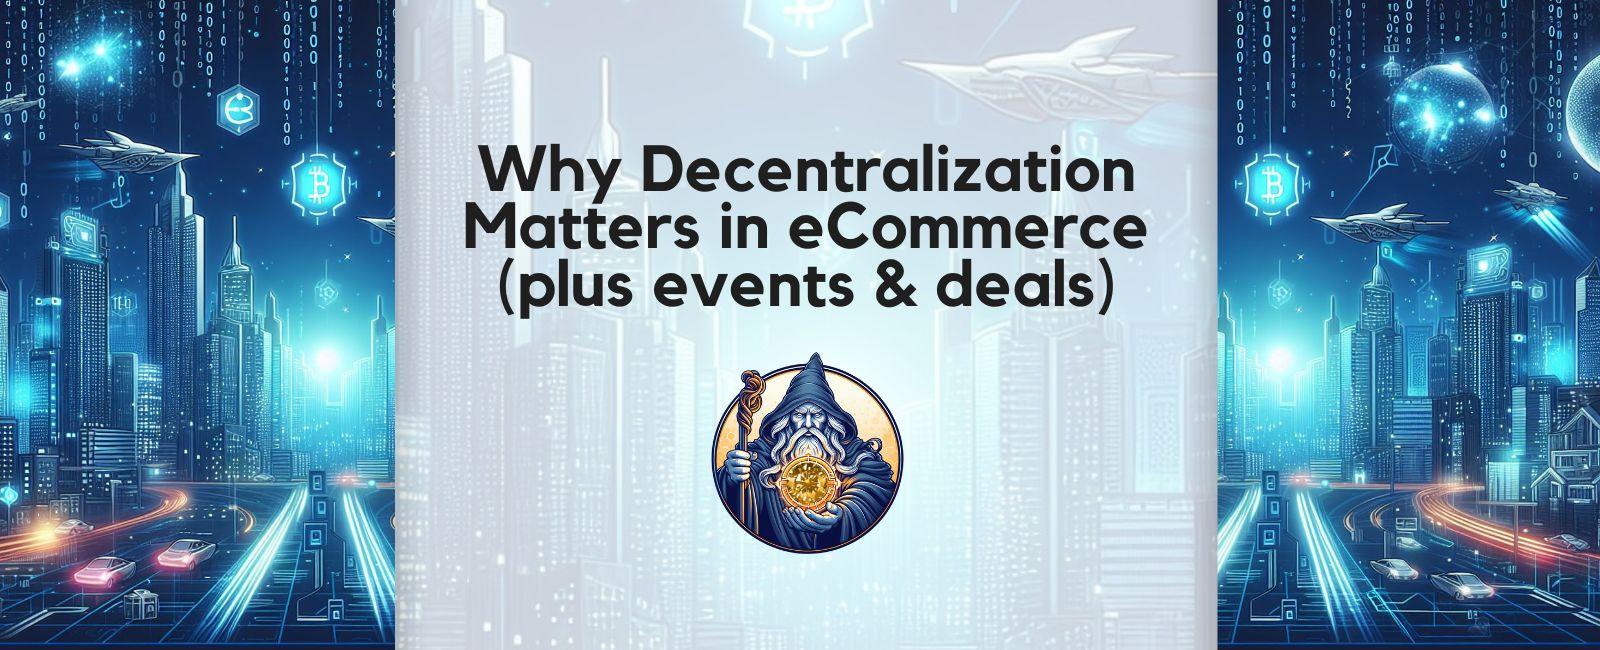 Why Decentralization Matters in eCommerce (plus events & deals)